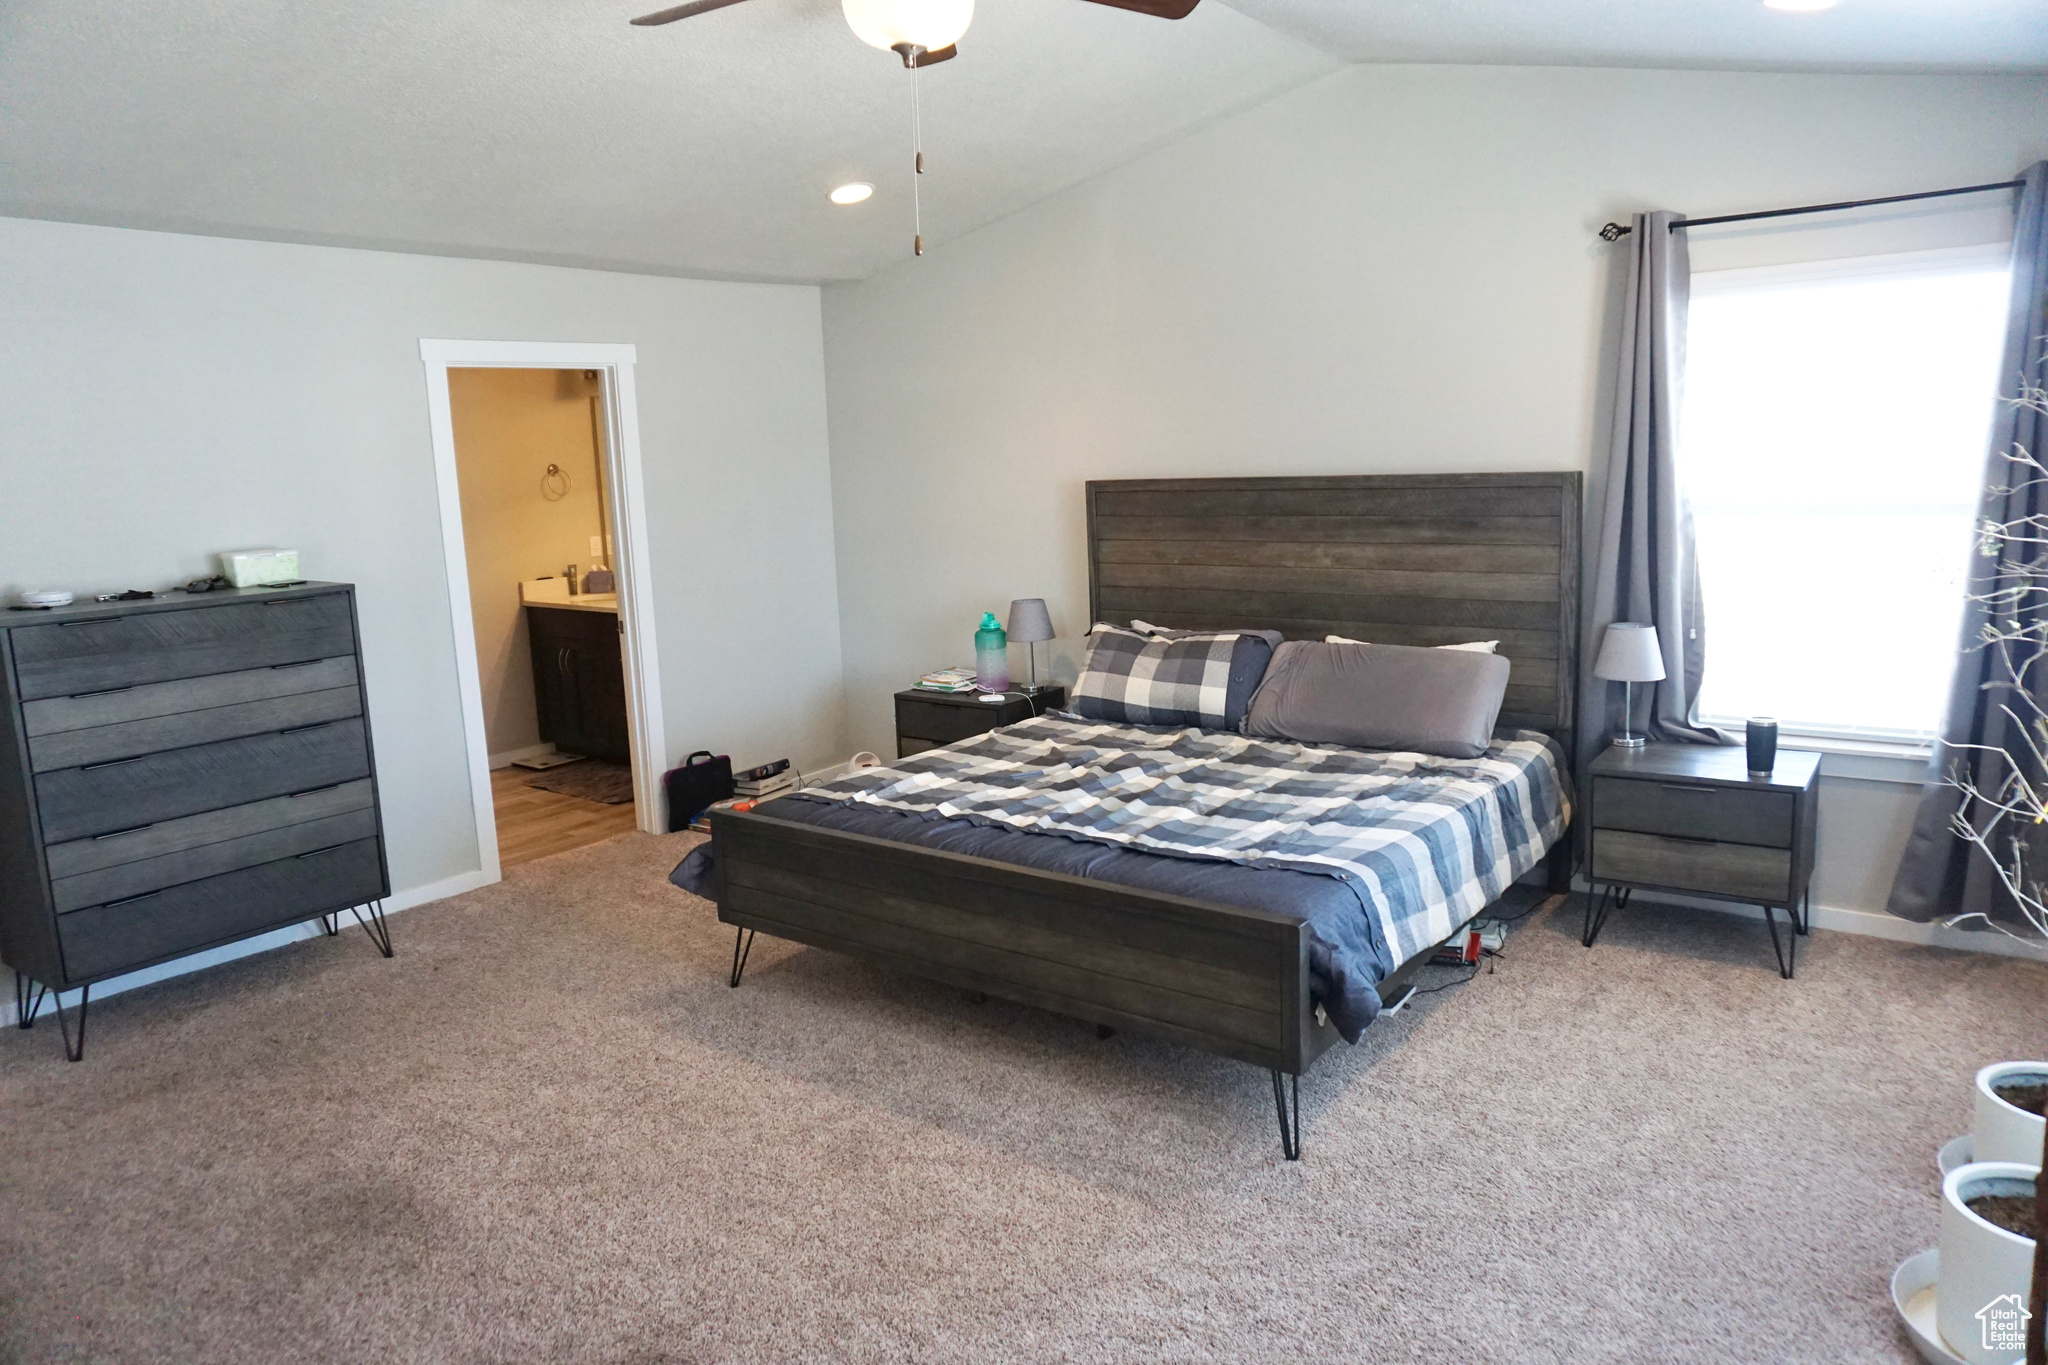 Bedroom featuring ensuite bath, ceiling fan, carpet floors, and lofted ceiling